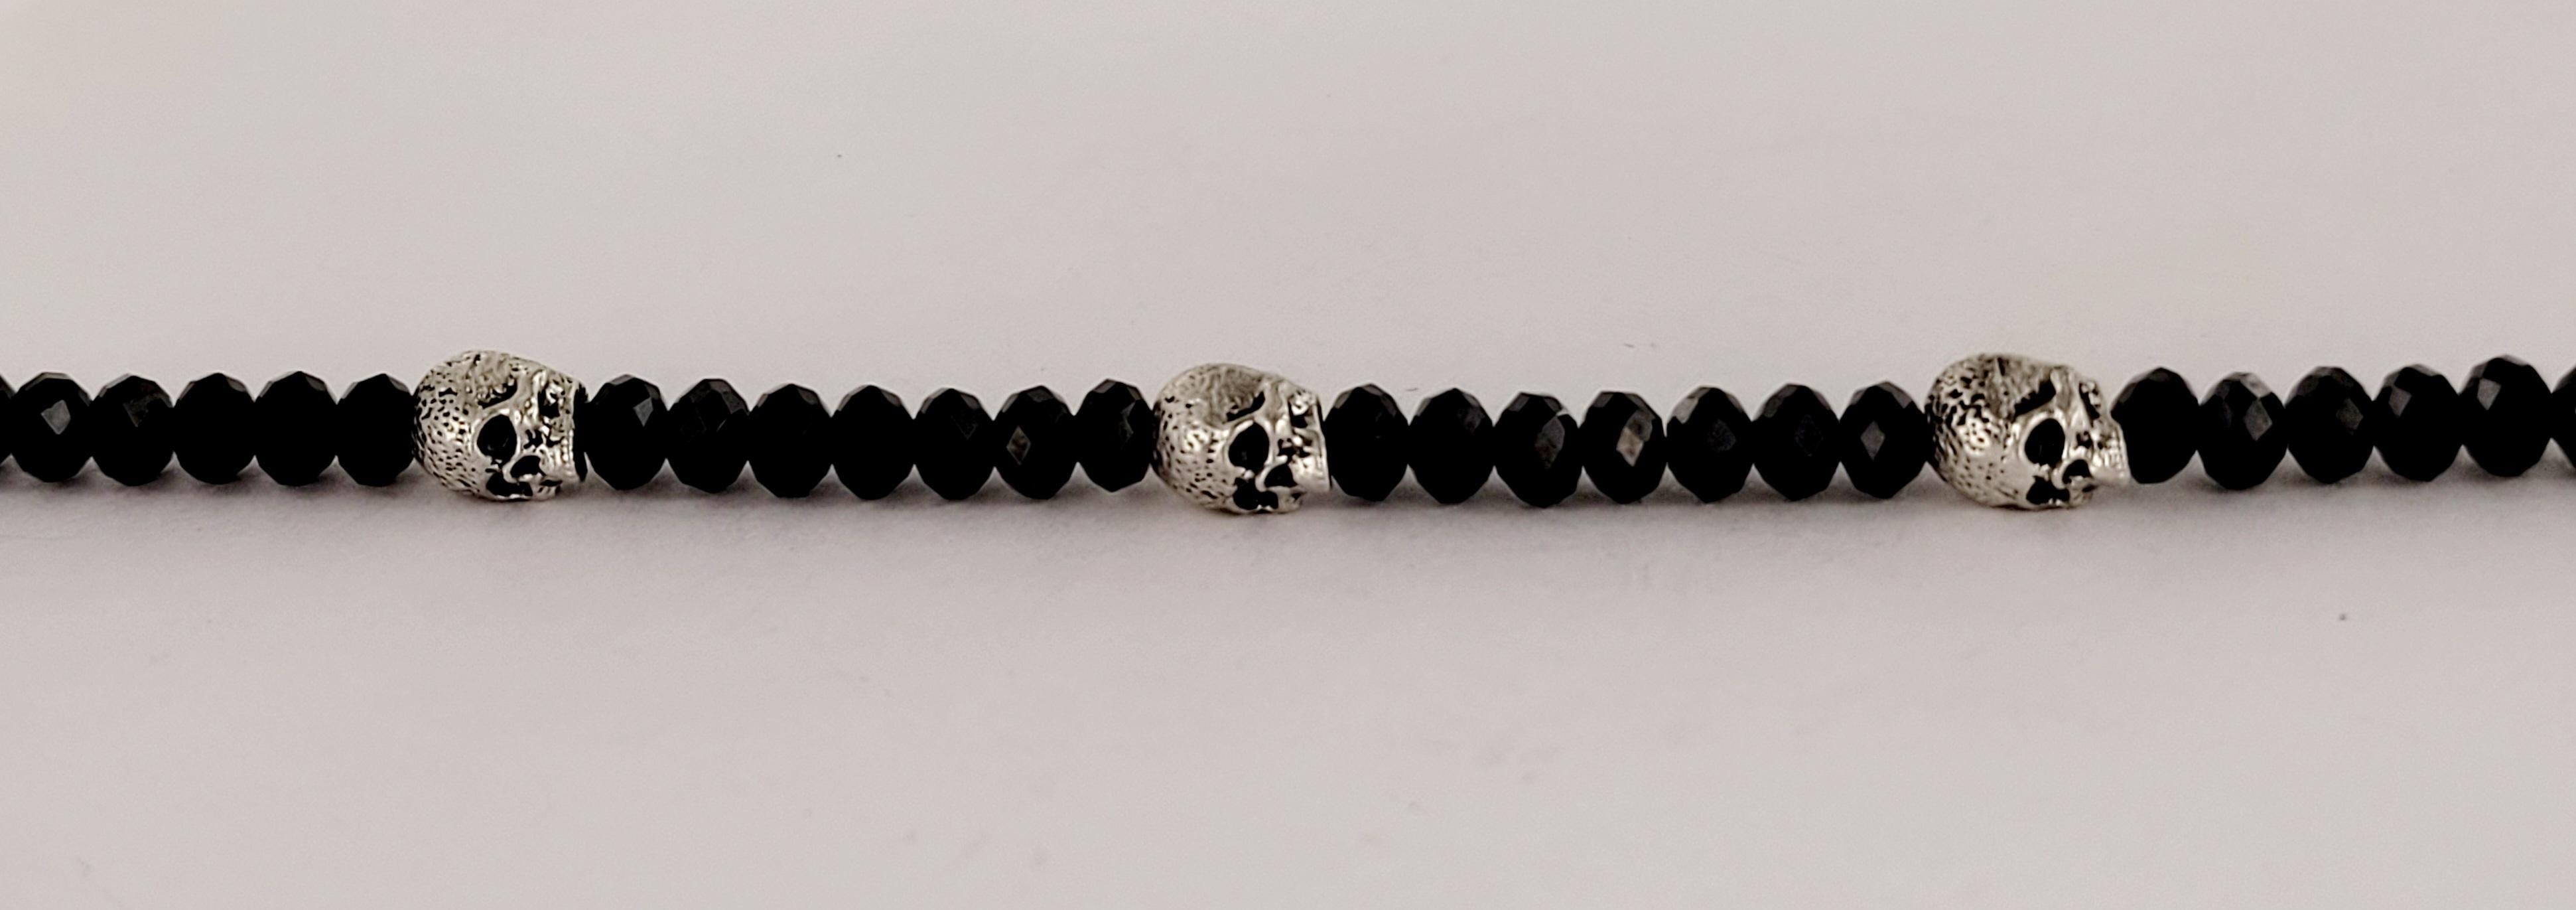 Memento Mori Skull Station Bracelet Sterling Silver with Black Spinel, 5mm In New Condition For Sale In New York, NY